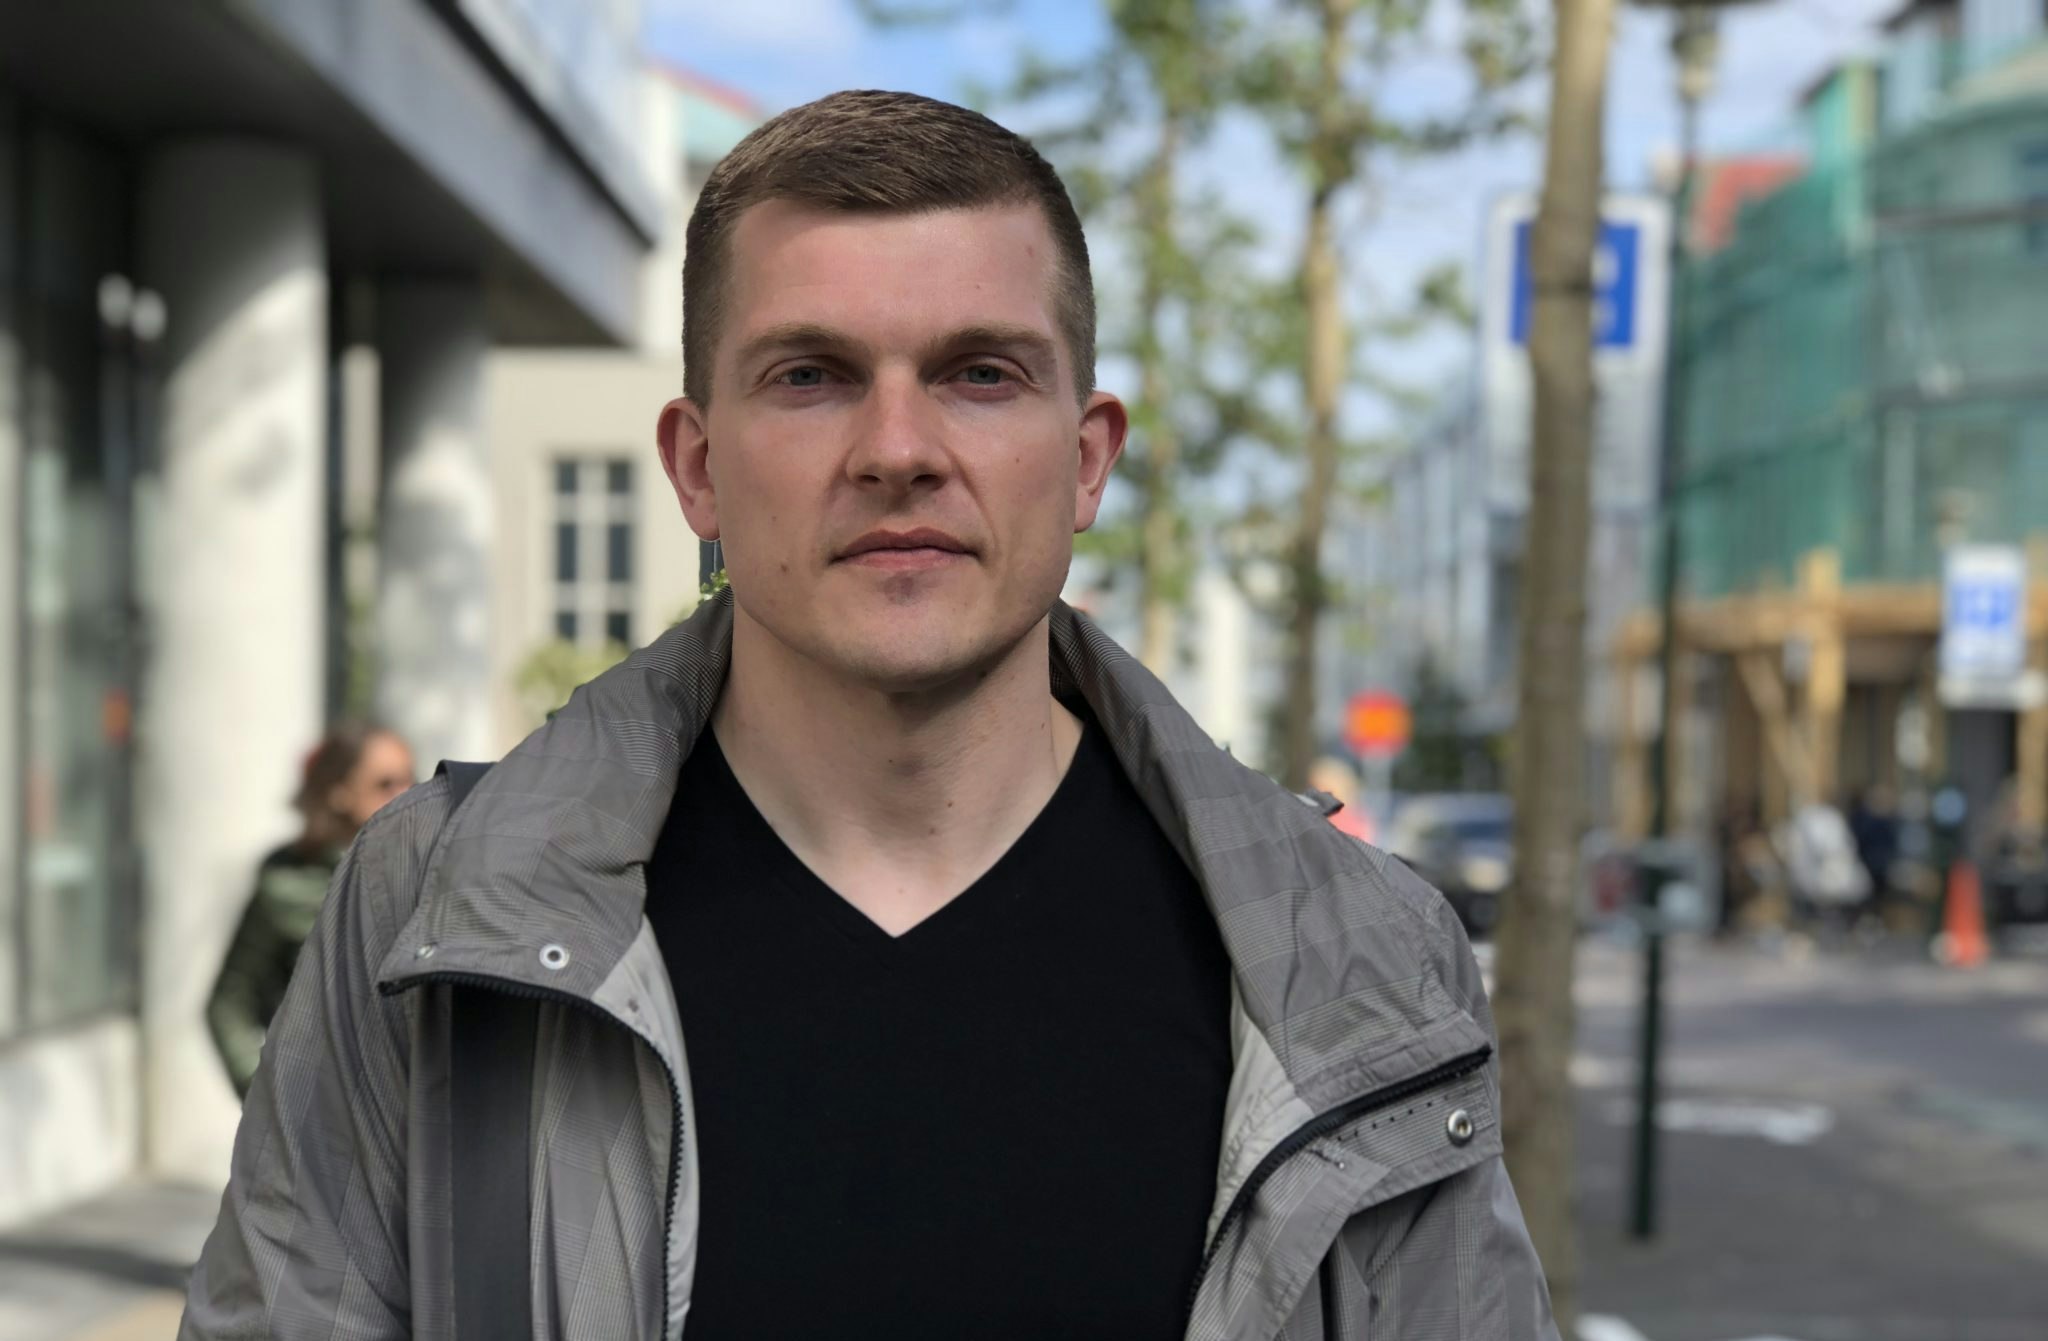 Image of Daniel Jonsson, a large scale cryptocurrency mining specialist at Eldar mining in Reykjavik